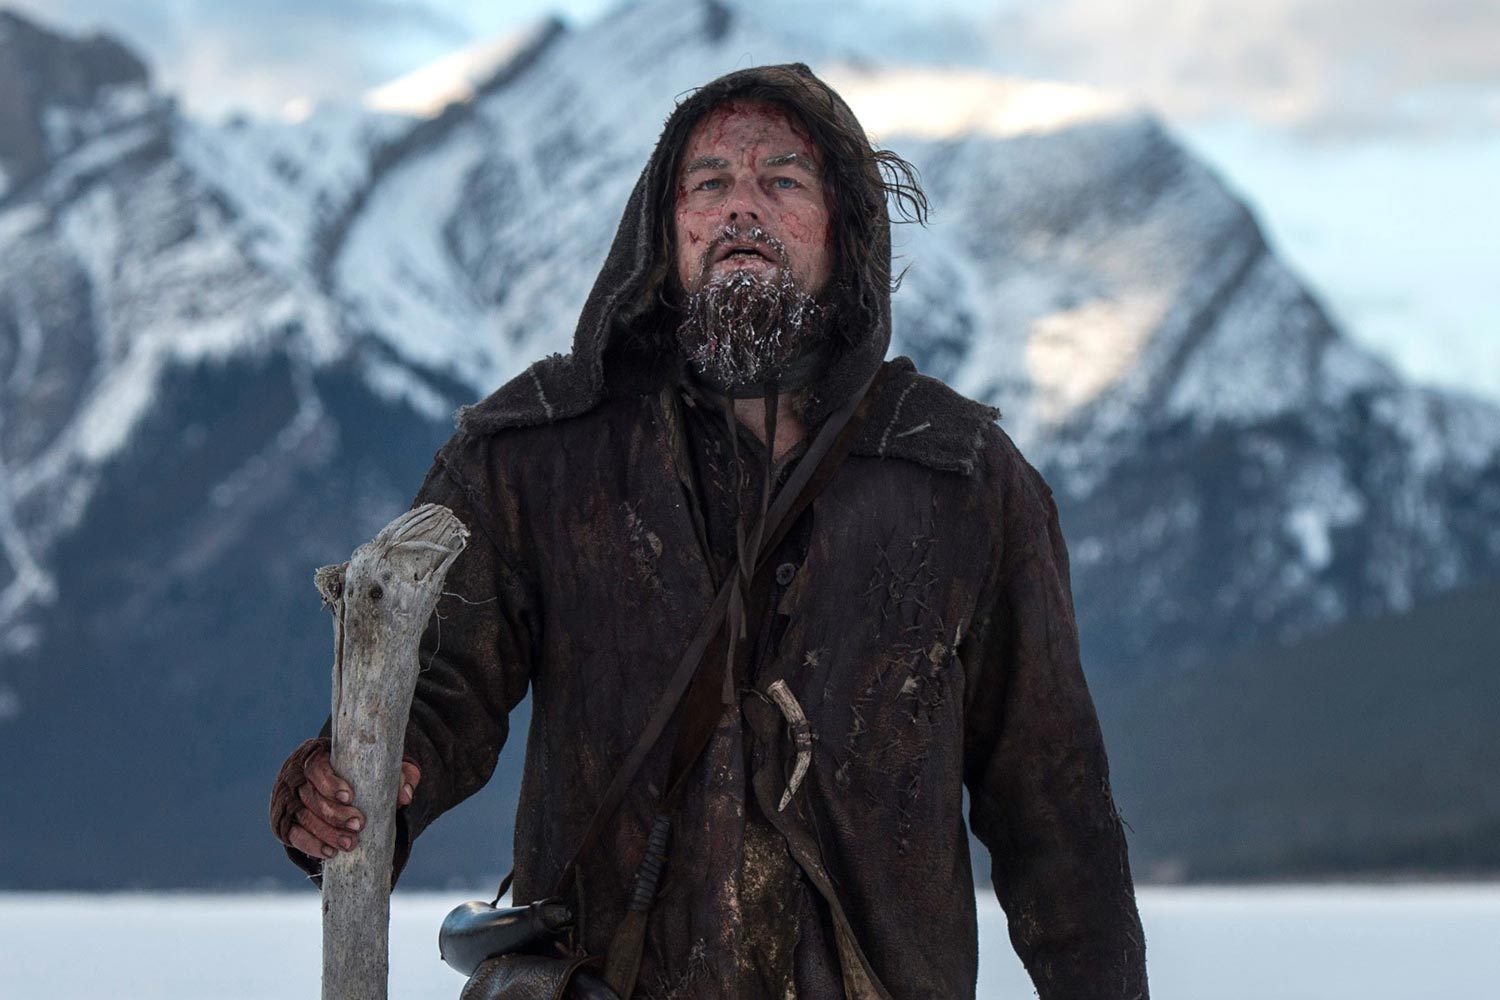 oscars 2016 winners and losers in every category best picture the revenant